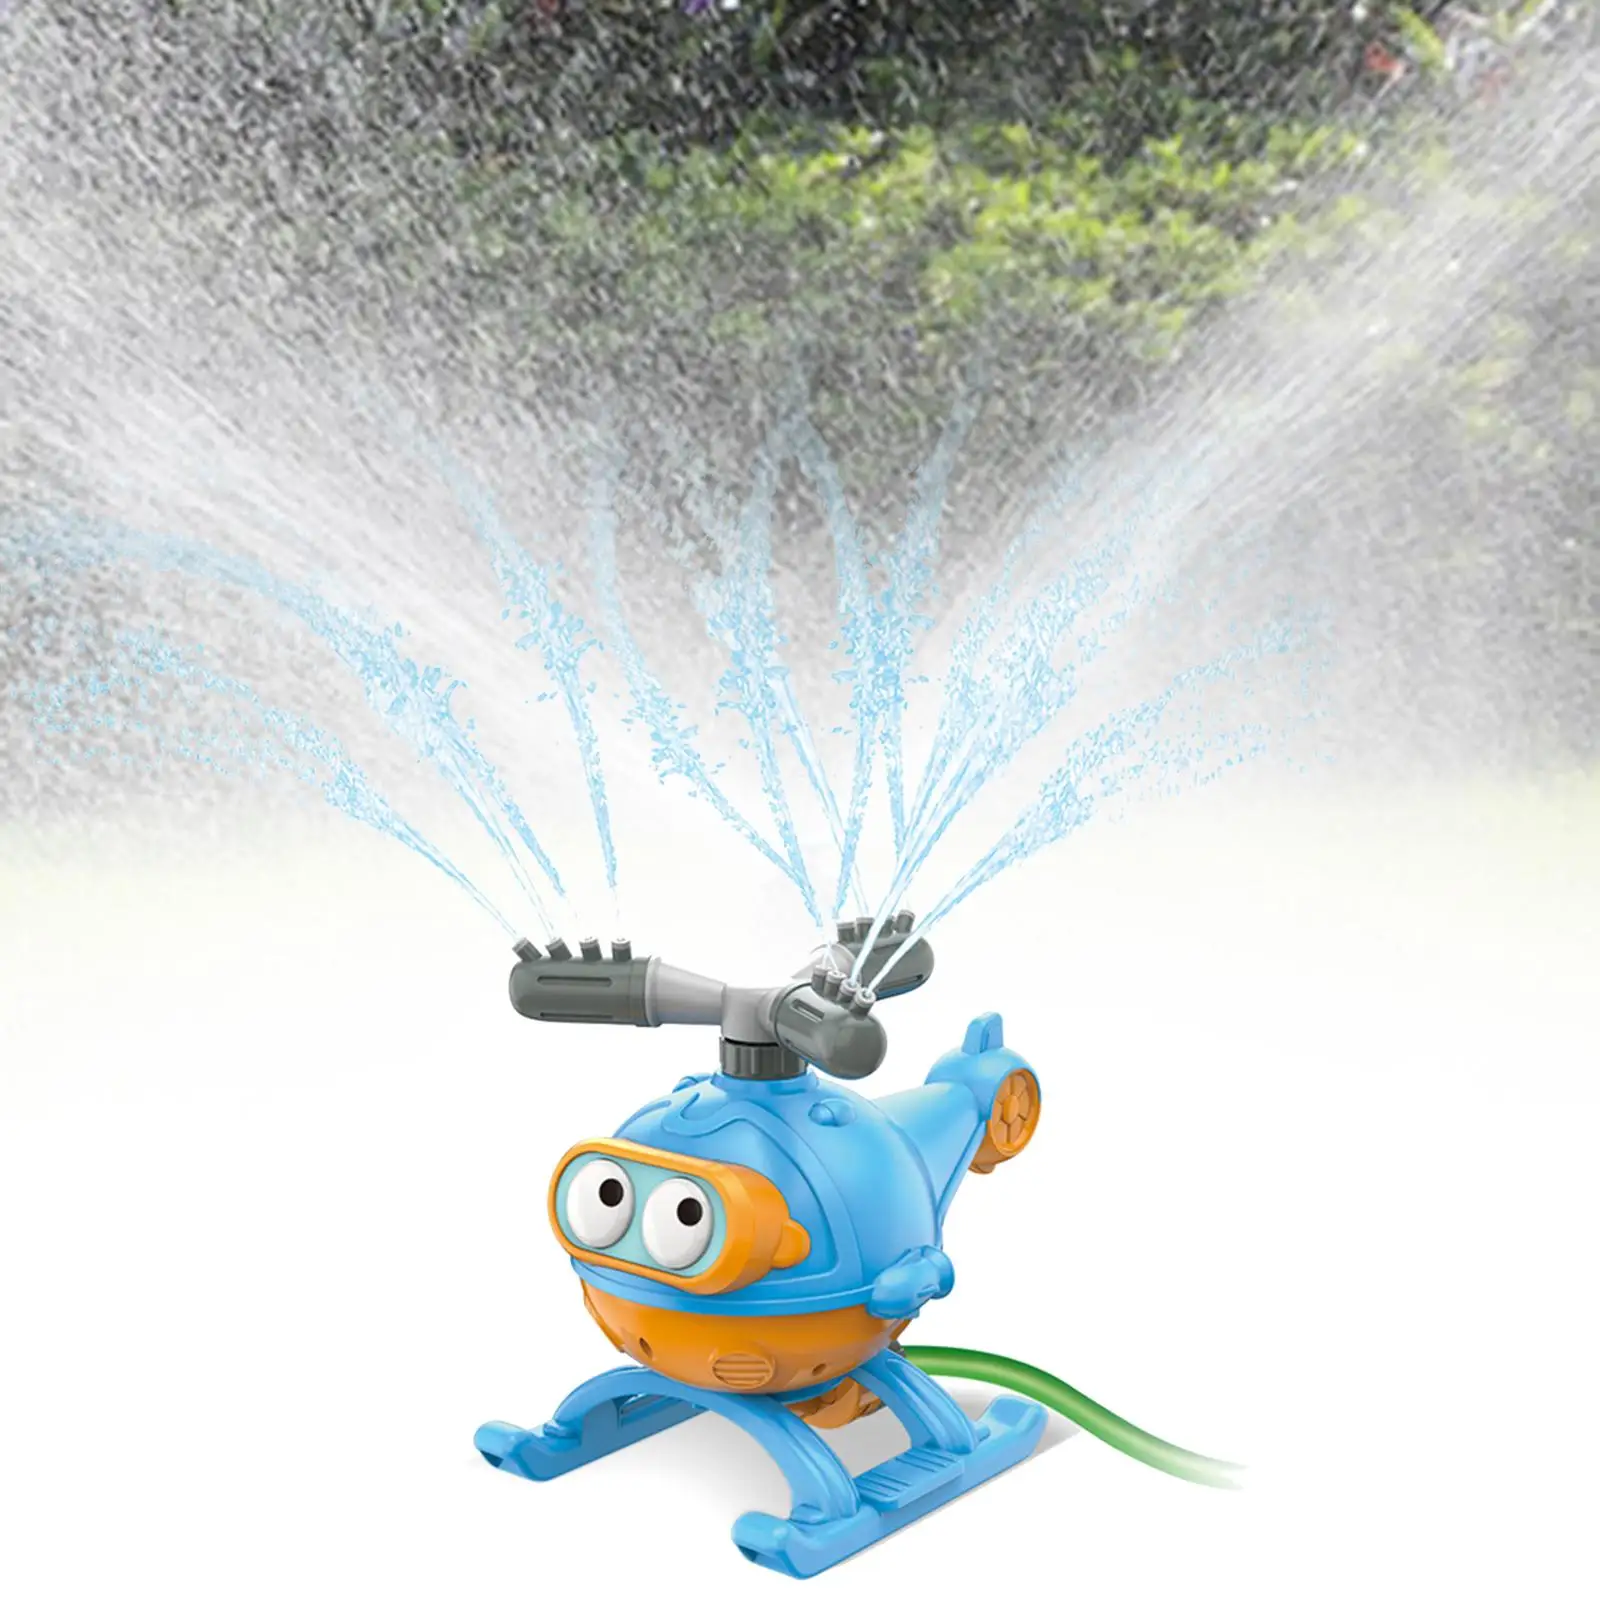 Outdoor Water Sprinkler Helicopter Shaped Backyard Game Water Pressure Control for Backyard Holiday Summer Toy Pets Boys Girls